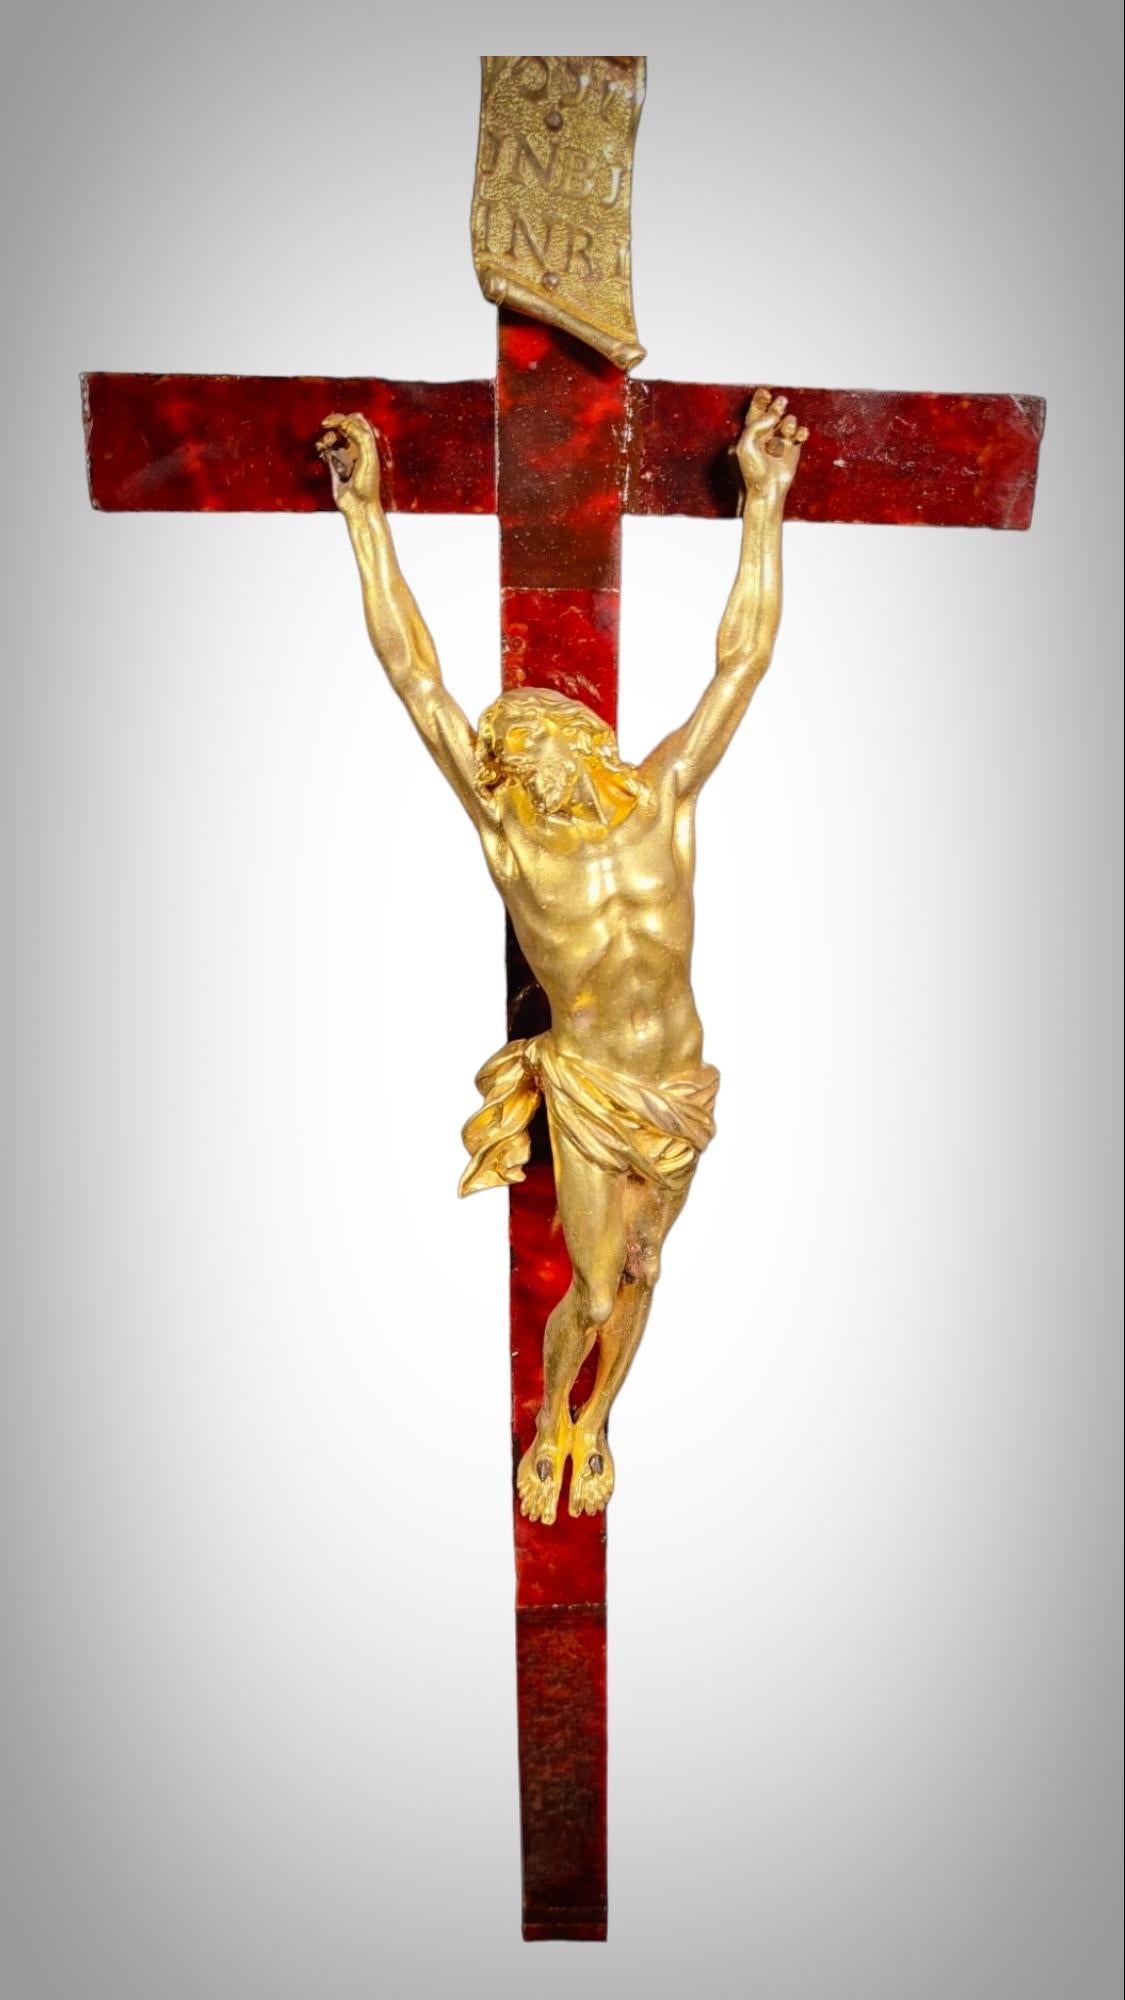 Large Cross With Christ In Gilt Bronze From The 17th Century
IMPORTANT 17th C. CROSS TO CHRIST IN FINELY CHISELLED GOLD BRONZE FRENCH SCHOOL OF THE 17TH C. THE CROSS MEASURES 50 X 20 CM AND CHRIST 25 X 7 CM